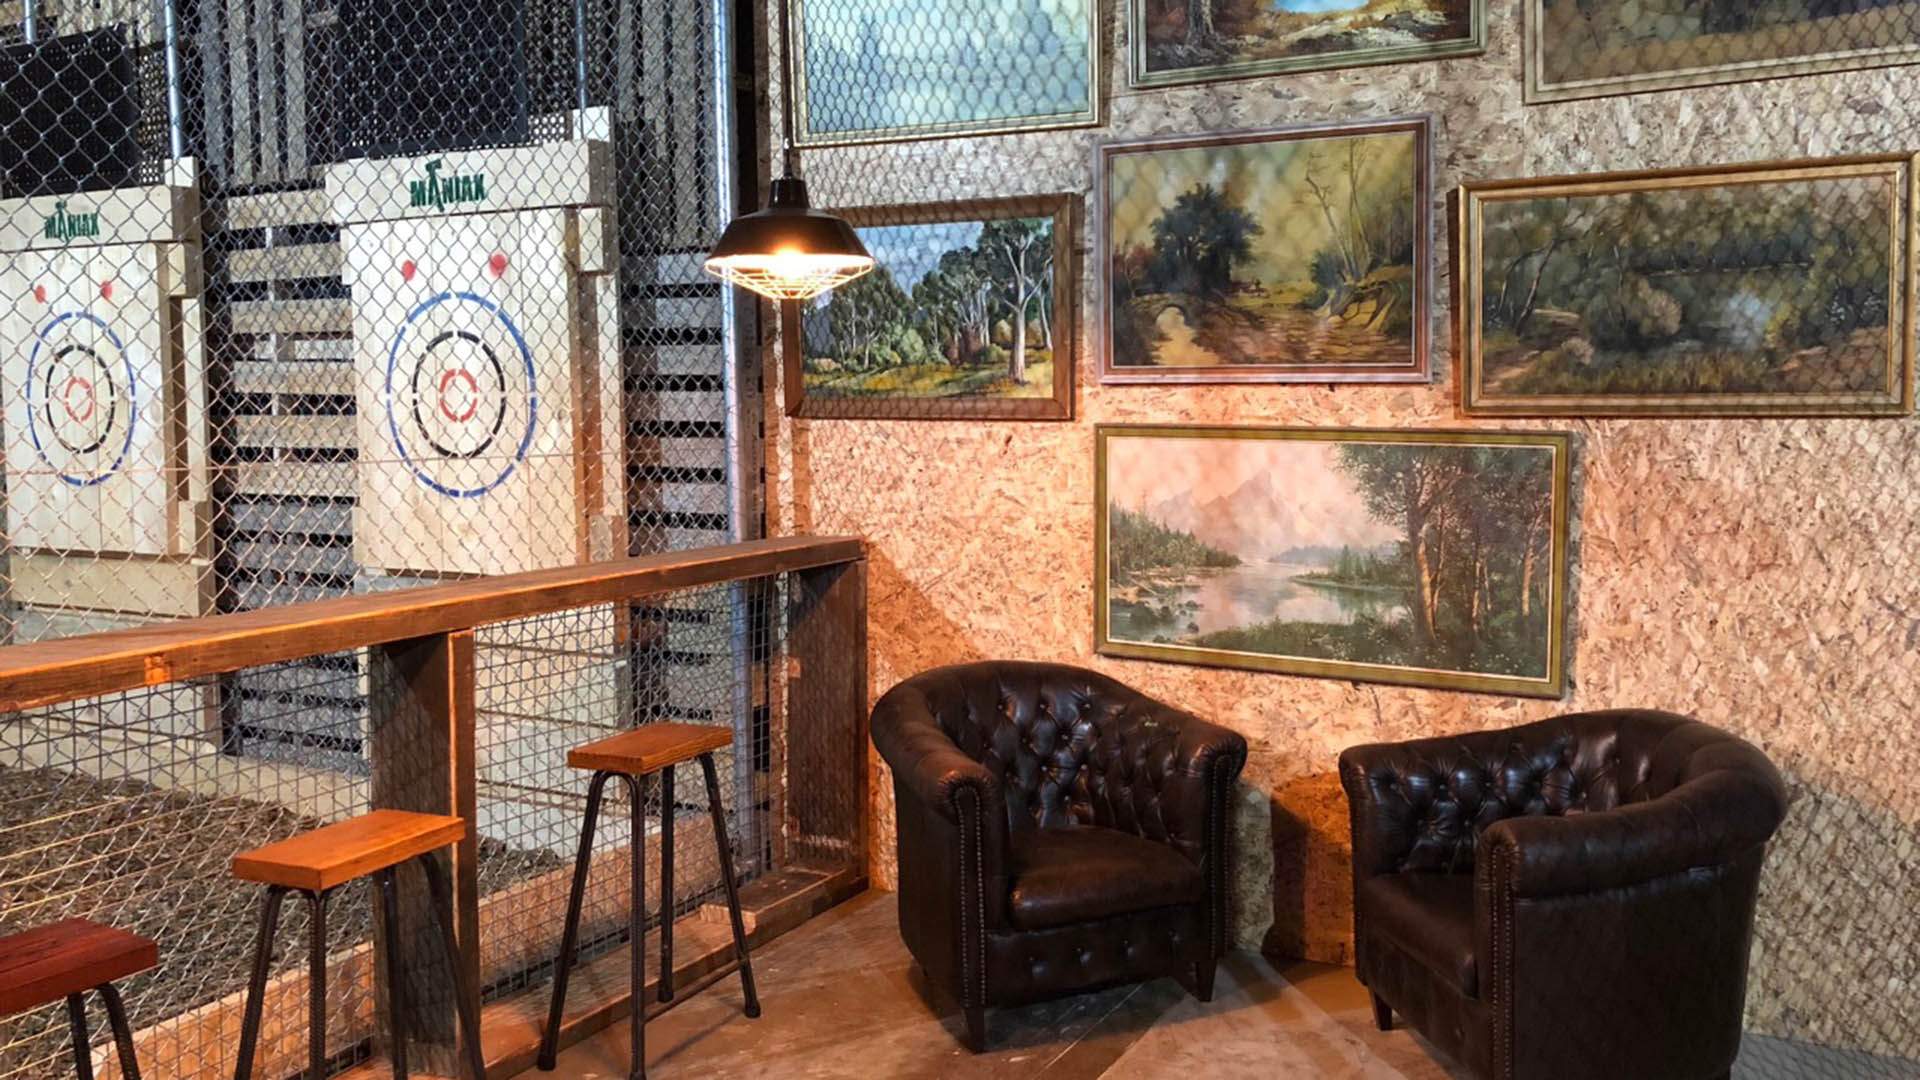 Sydney's Axe Throwing Joint Maniax Is Finally Opening in Brisbane Next Month